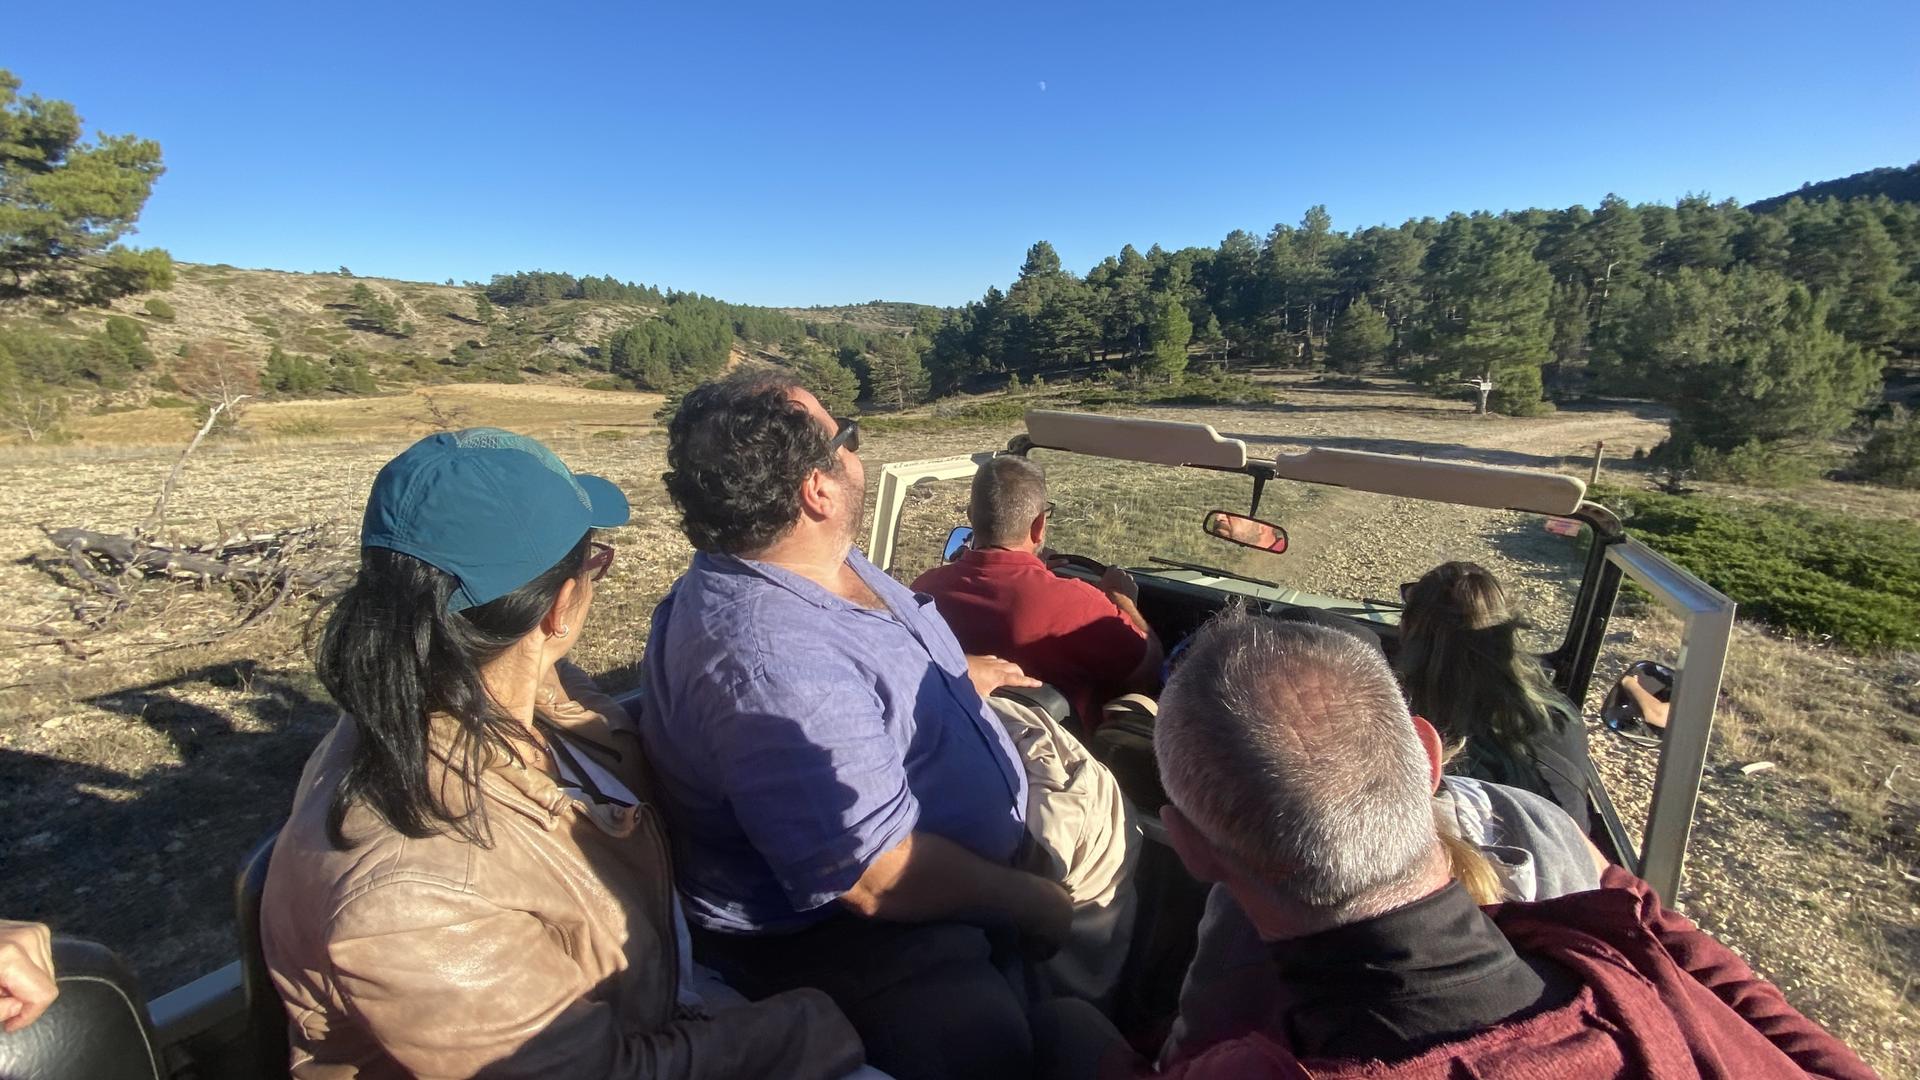 Almazán’s not getting rich off his rewilding safaris, but he’s betting that driving tourists into the mountains to see feral horses, the aurochs and reintroduced species of vultures will one day pay off.